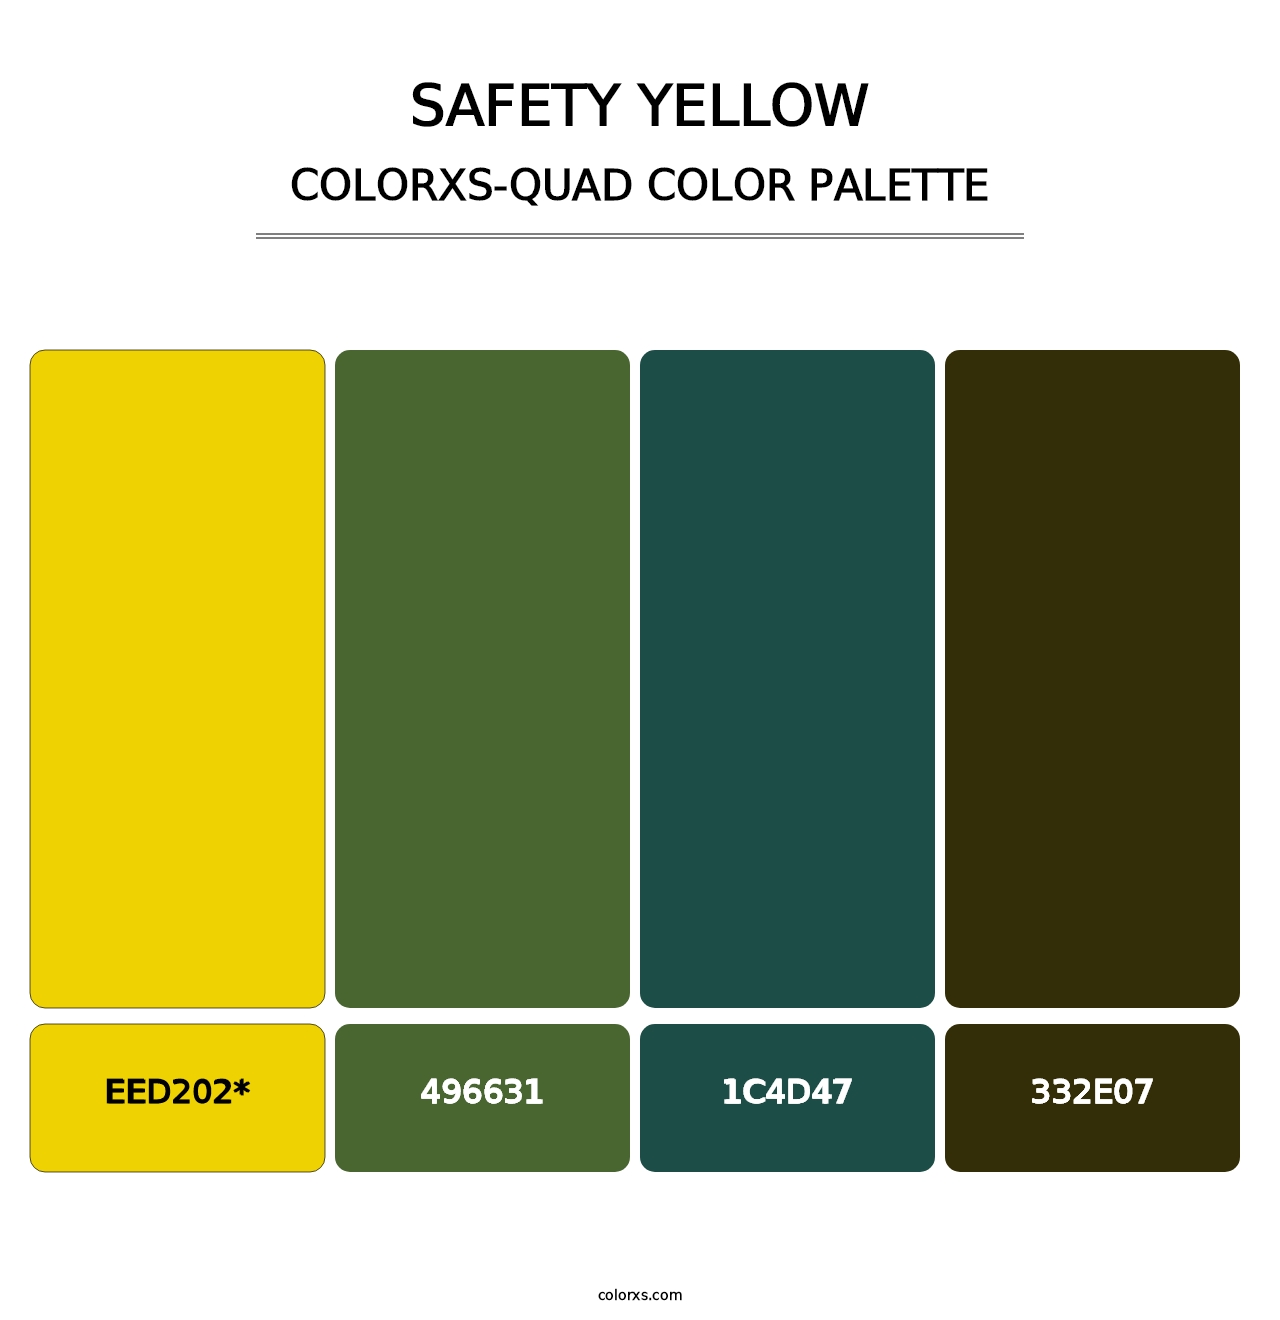 Safety Yellow - Colorxs Quad Palette